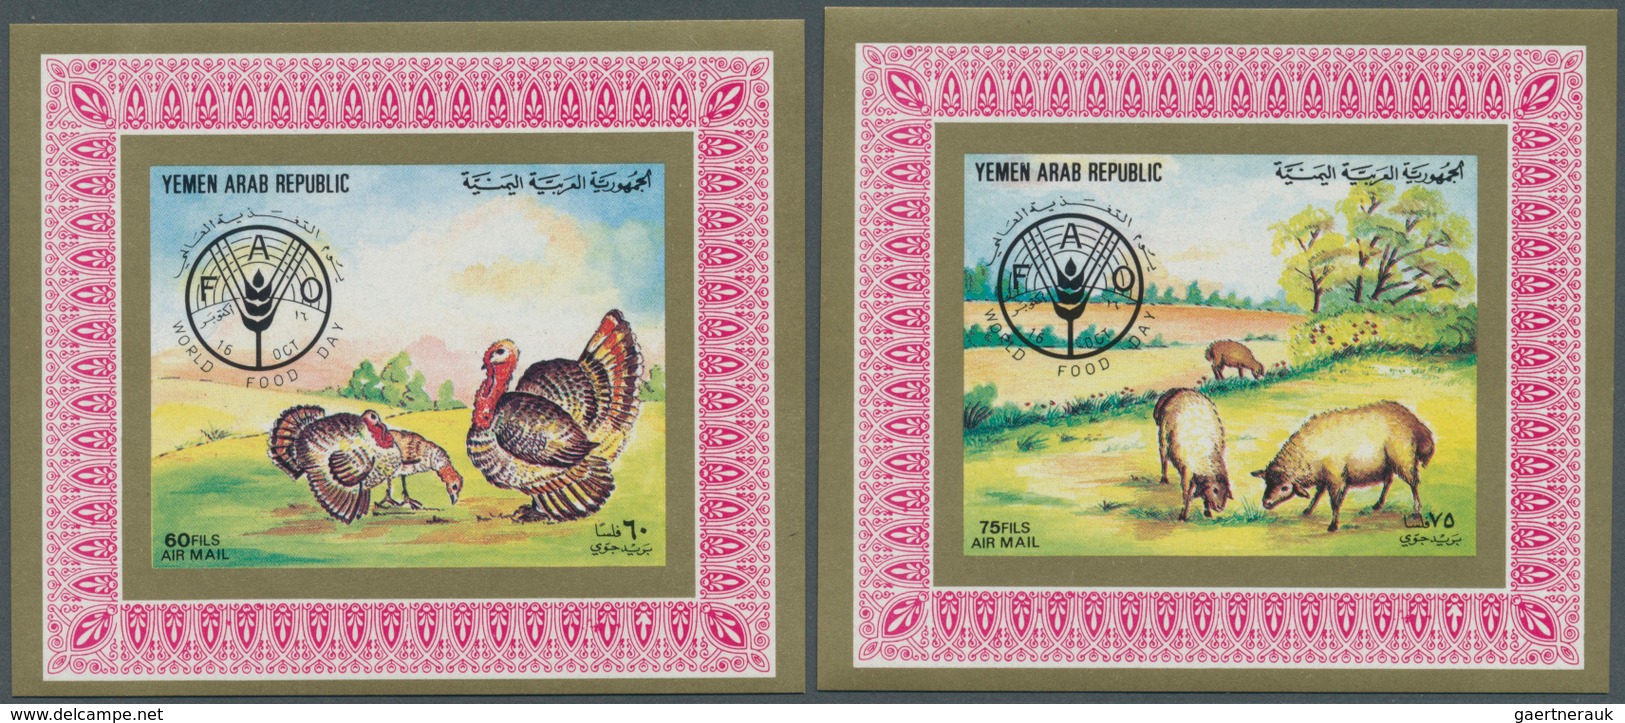 Jemen: 1980/1985, DE LUXE SHEETS, seven different issues with 25 complete sets of de luxe sheets eac